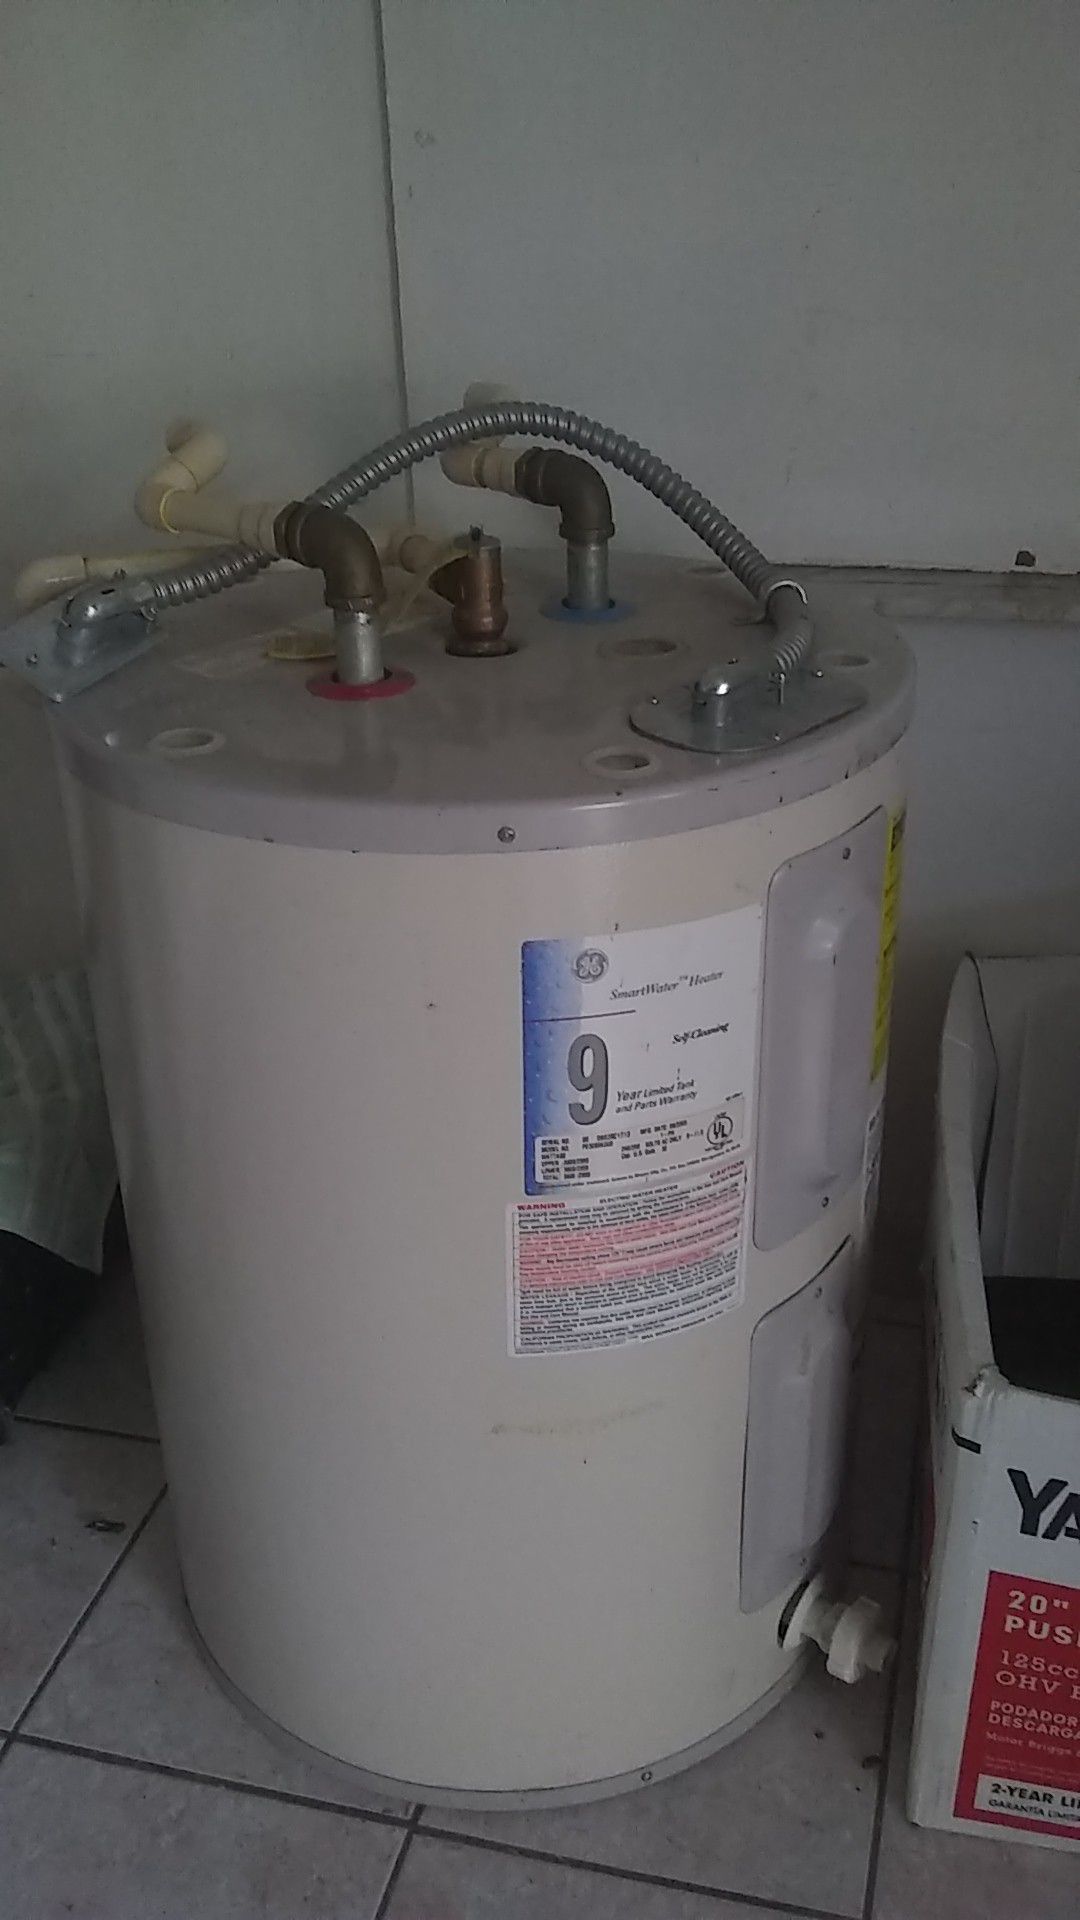 Get 9 years great condition like new 100 dollars30 gal